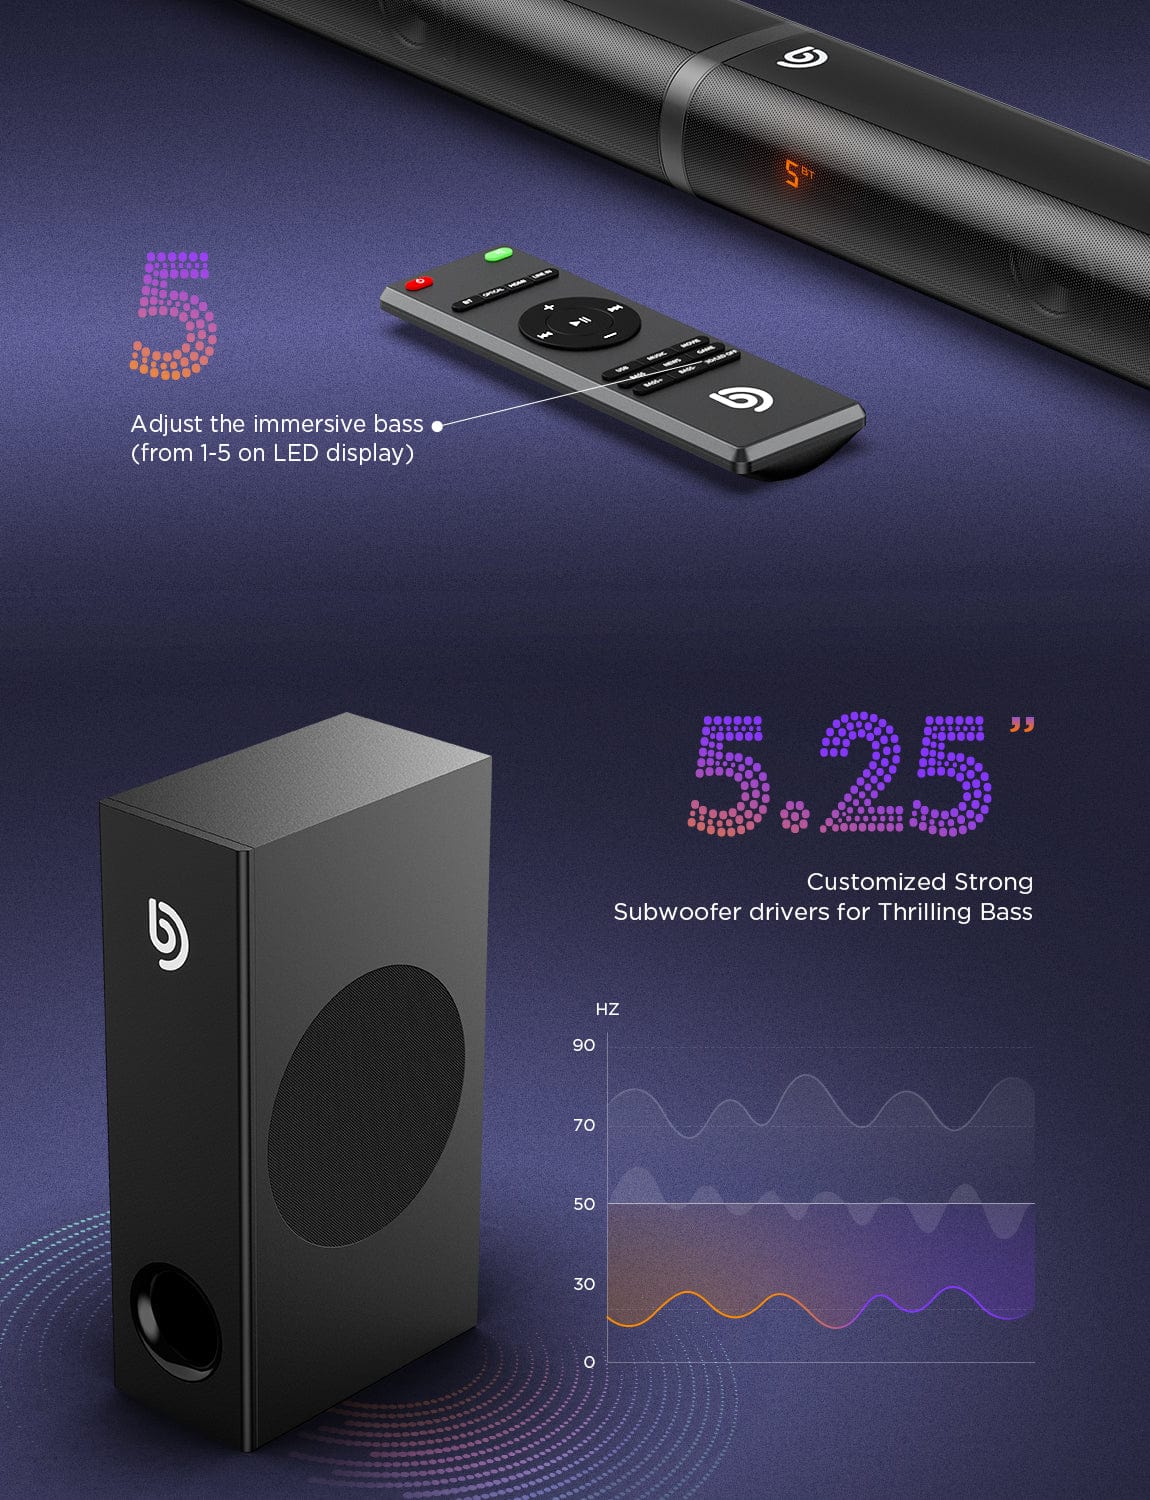  2.1CH Sound Bar for TV with Subwoofer, 190W, 125dB, 6 EQ Modes,  Audvoi 3D Surround Sound System for Home Theater Audio,  HDMI/Optical/Aux/USB/RCA, Movie, Game, Bass Mode, Remote Control, Wall  Mountable 